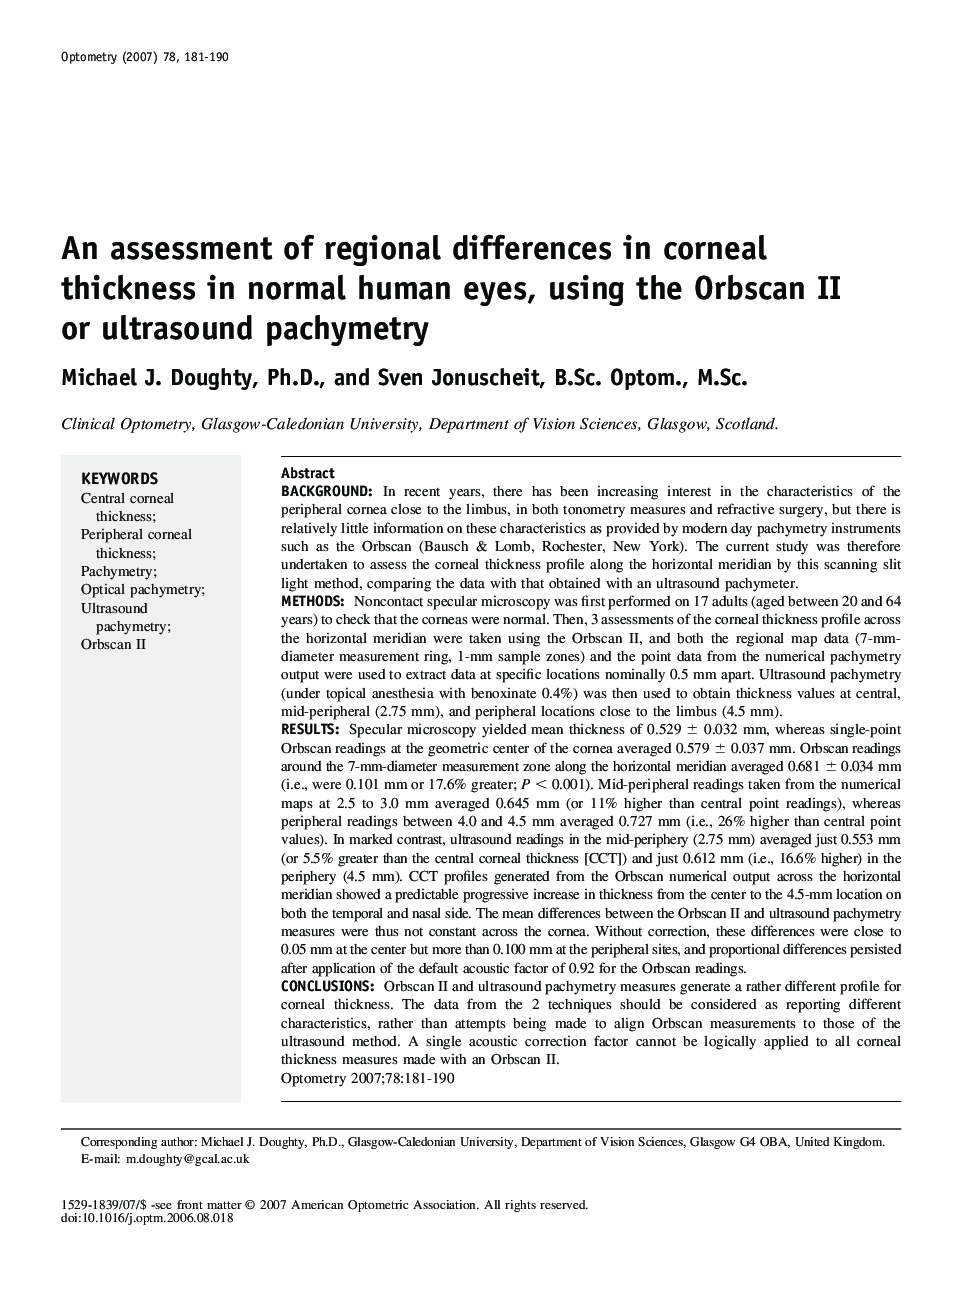 An assessment of regional differences in corneal thickness in normal human eyes, using the Orbscan II or ultrasound pachymetry